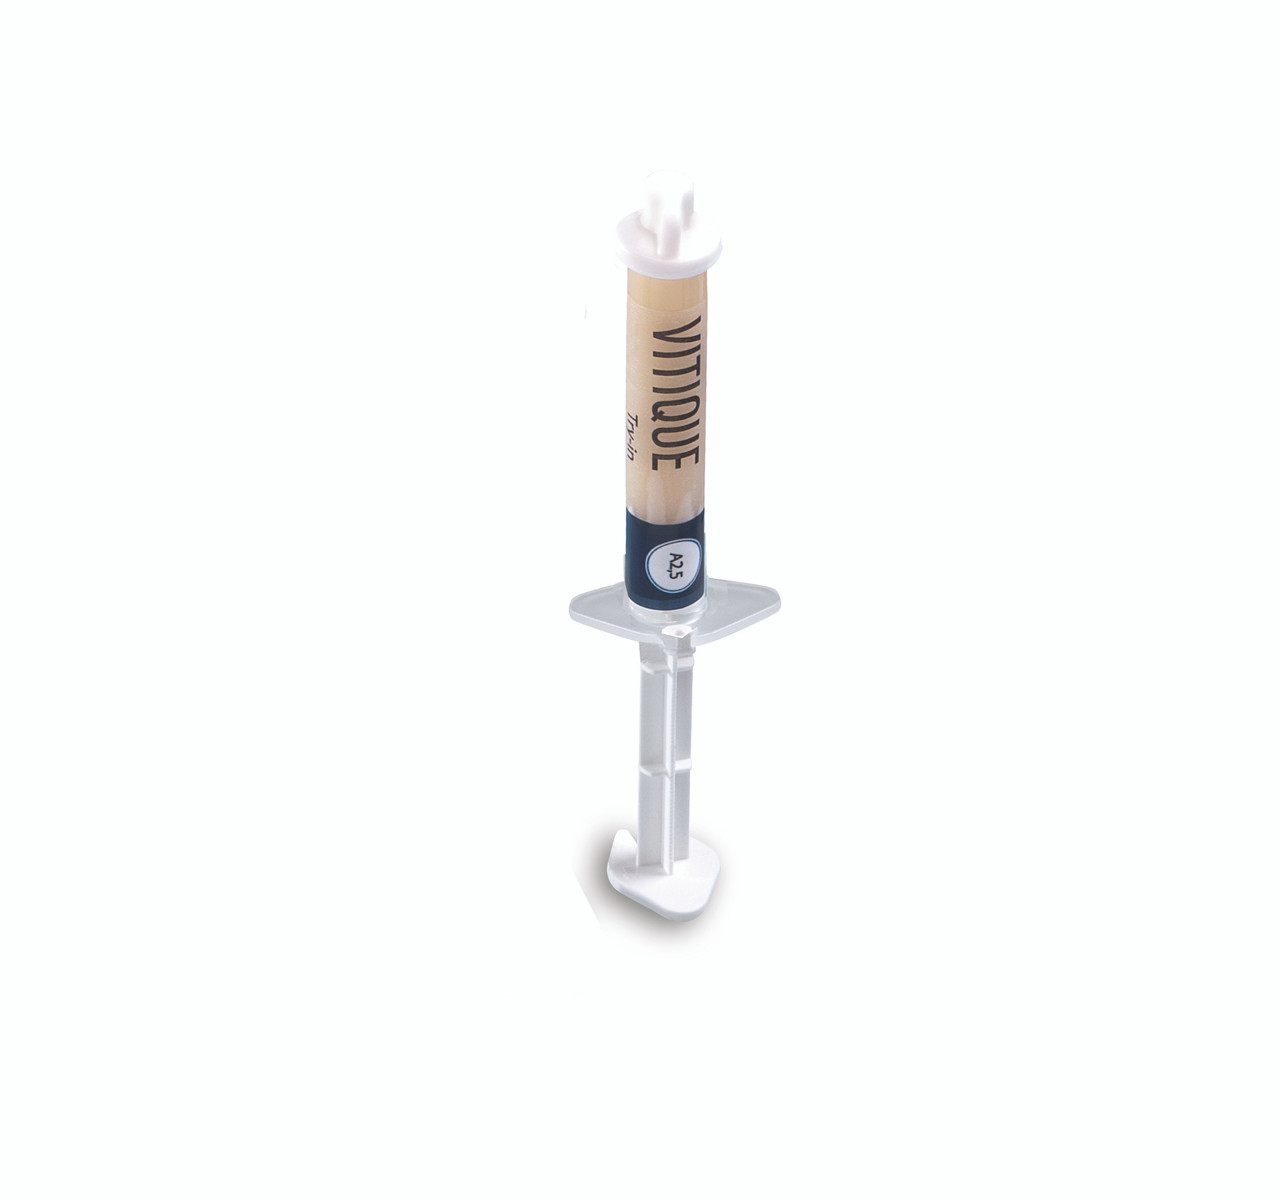 DMG America - Vitique Try-In Refill Syringe - A2.5